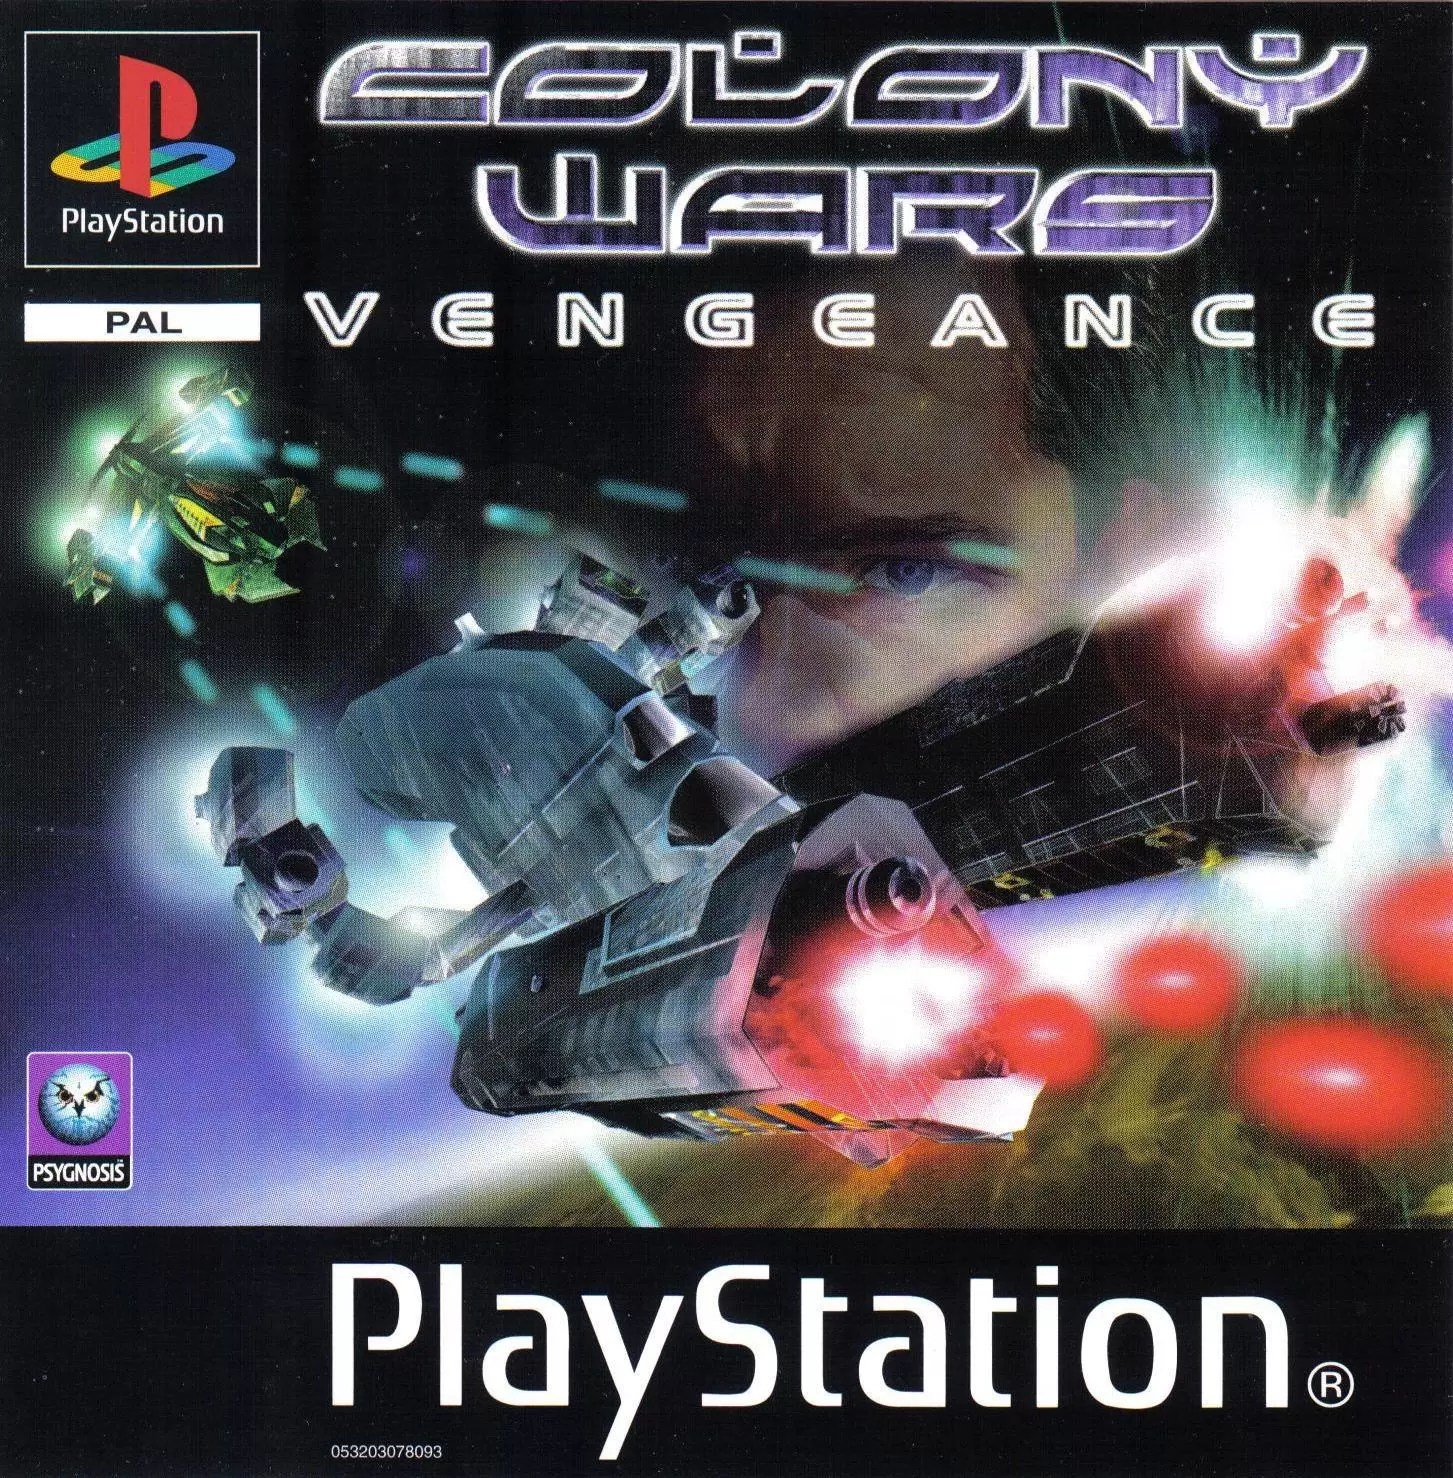 Playstation games - Colony Wars: Vengeance